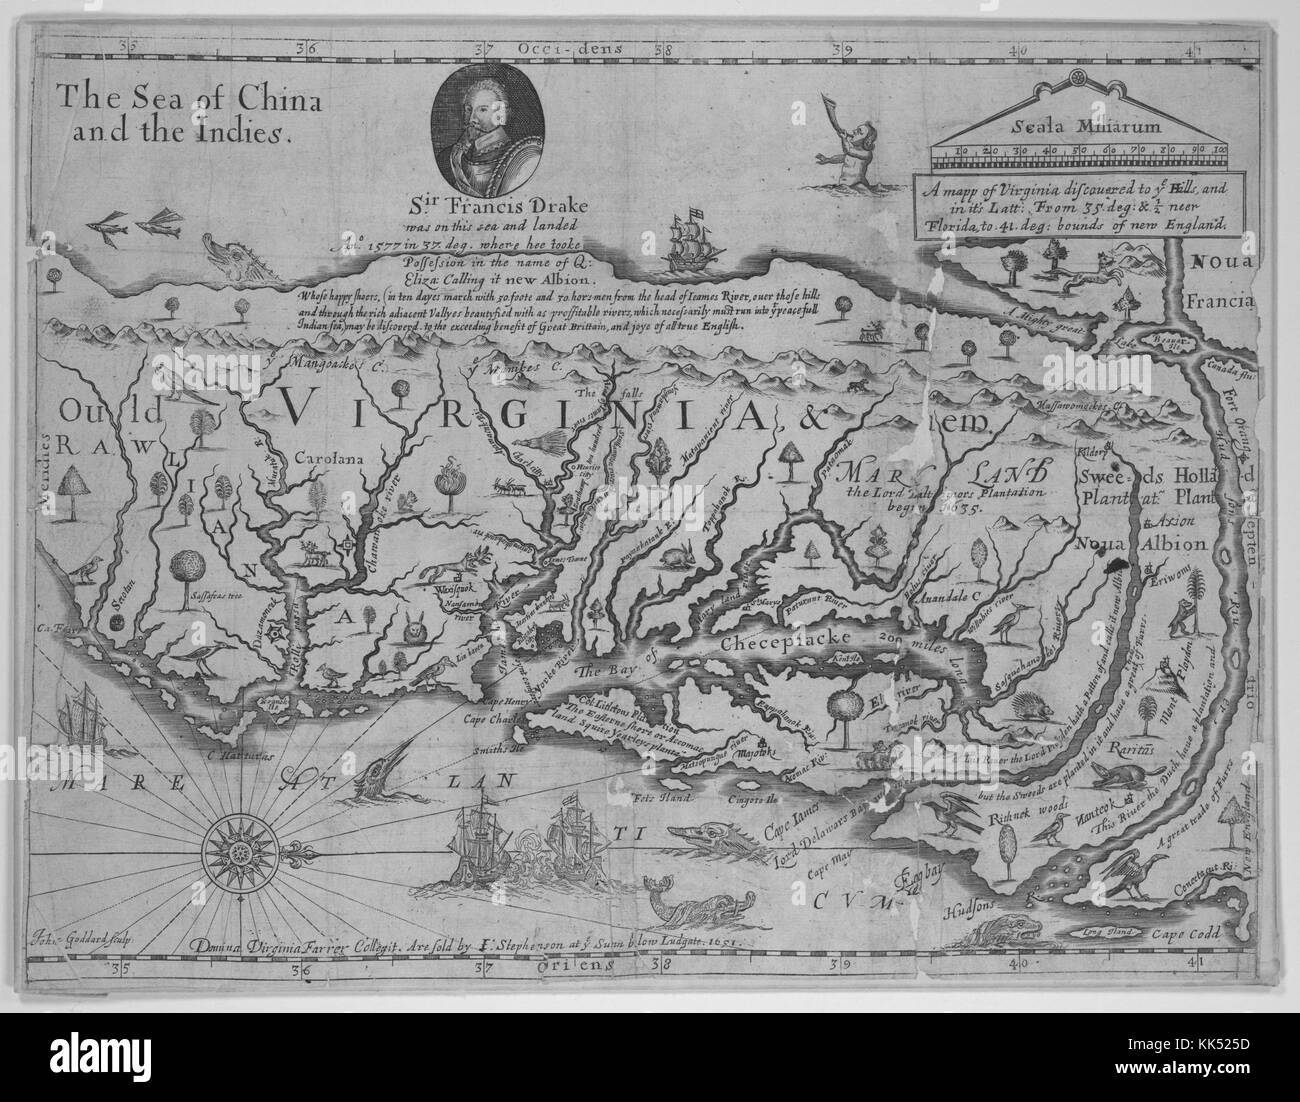 Engraved map of Virginia, depicting the Chesapeake Bay, the Atlantic Ocean, and a portrait of Sir Francis Drake in an insert at the top, map by the cartographer John Farrer, engraved by John Goddard, Virginia, 1651. From the New York Public Library. Stock Photo